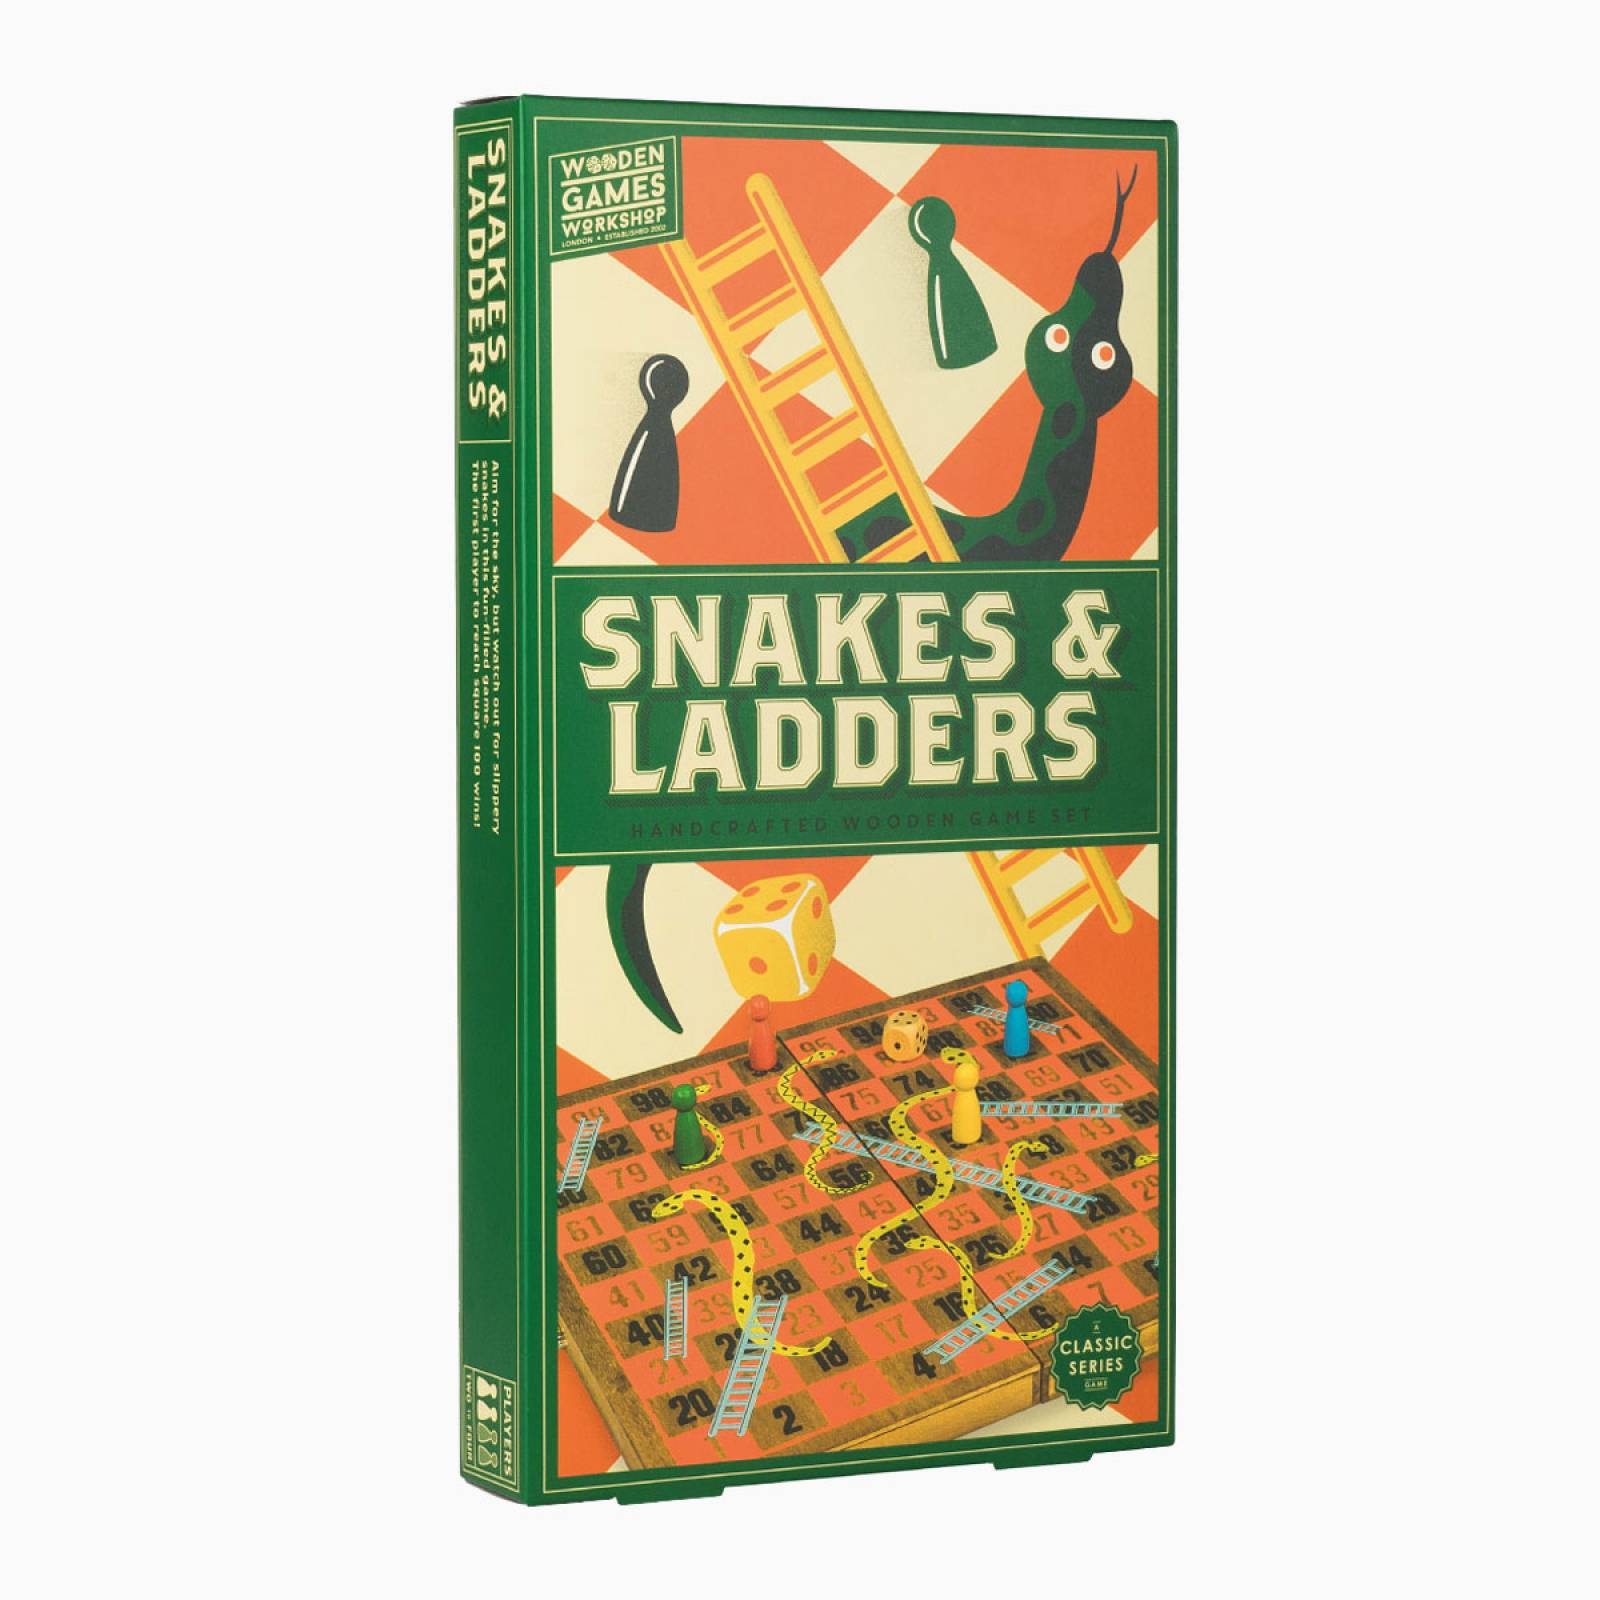 Snakes And Ladders - Handcrafted Wooden Board Game 3+